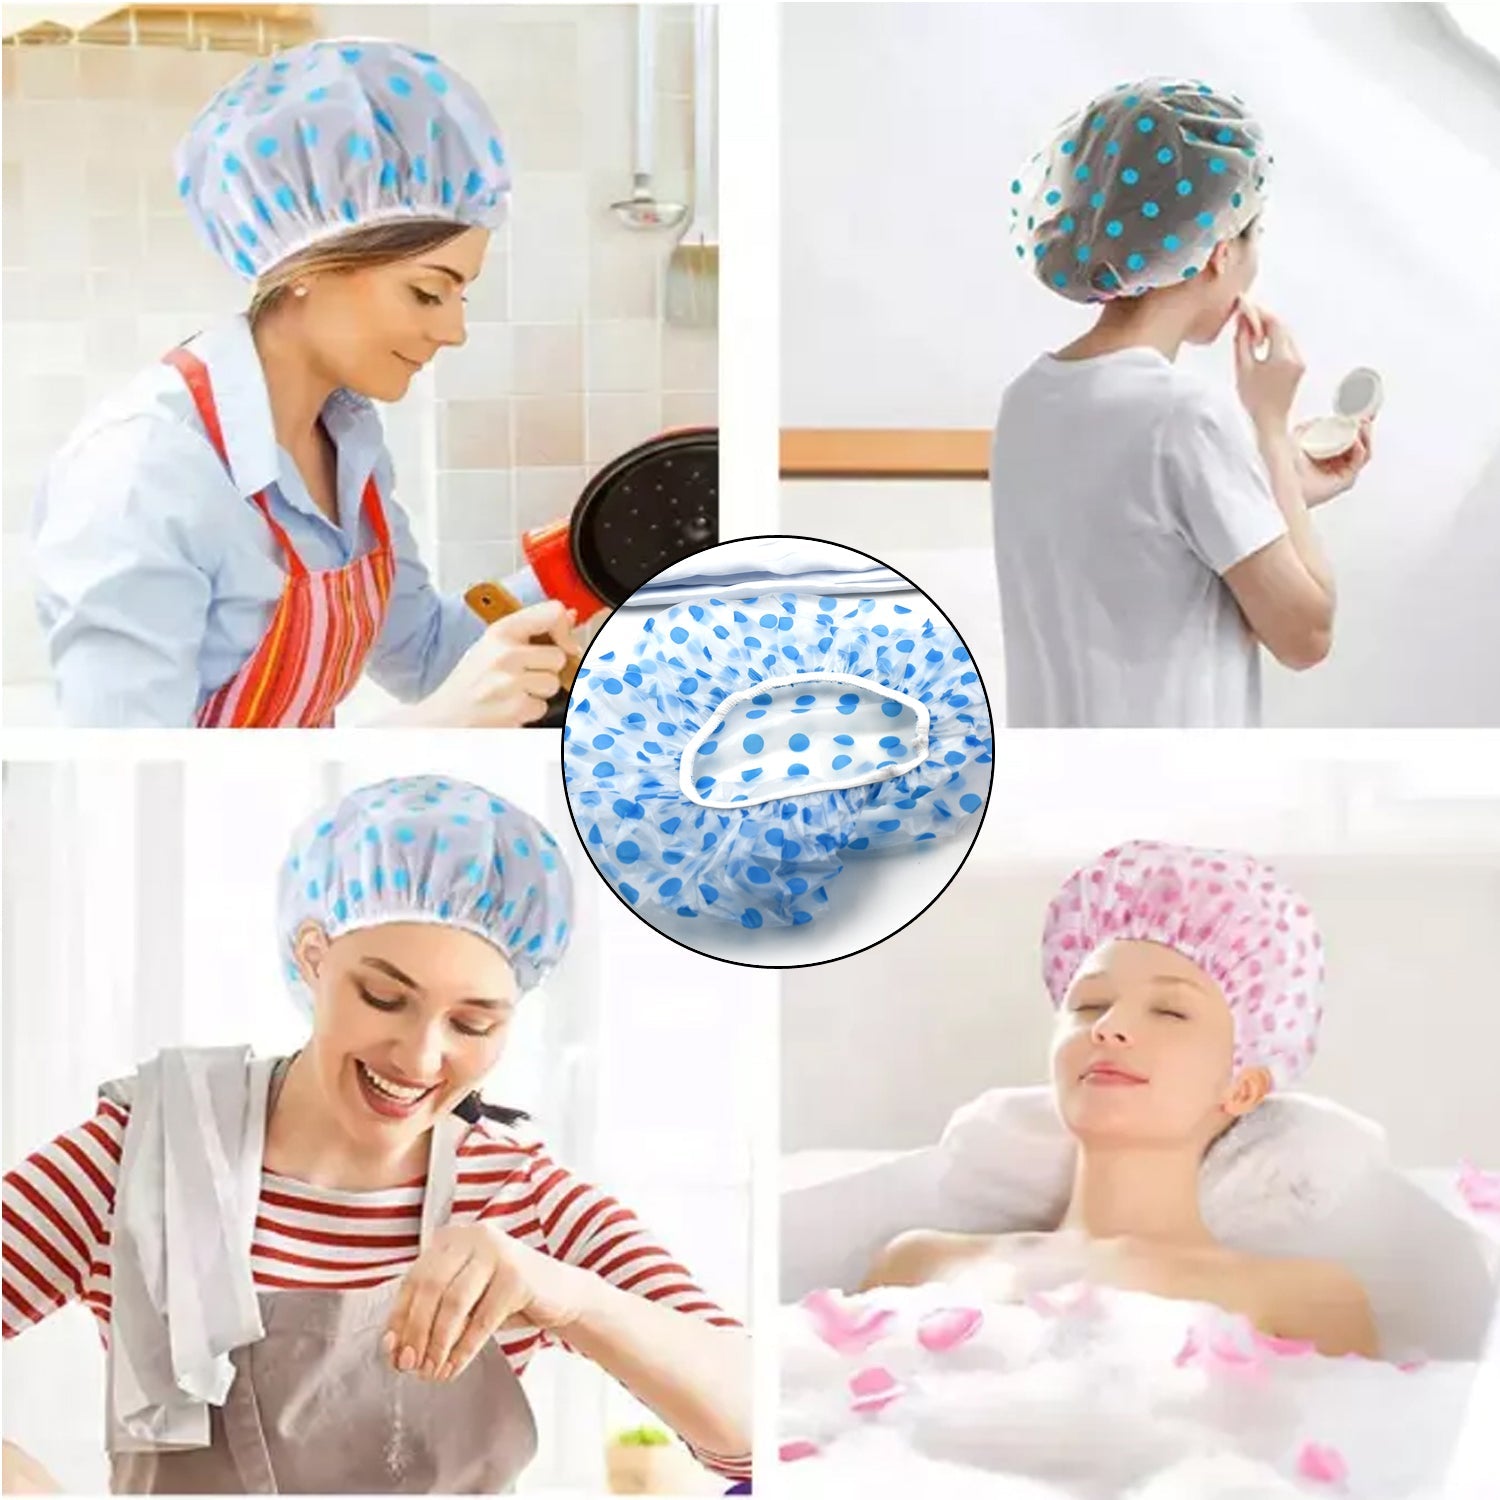 Solid Shower Curtain Set With Shower Cap, Loofah - Lightweight, For Bathrooms, Home (150X200 Cm)